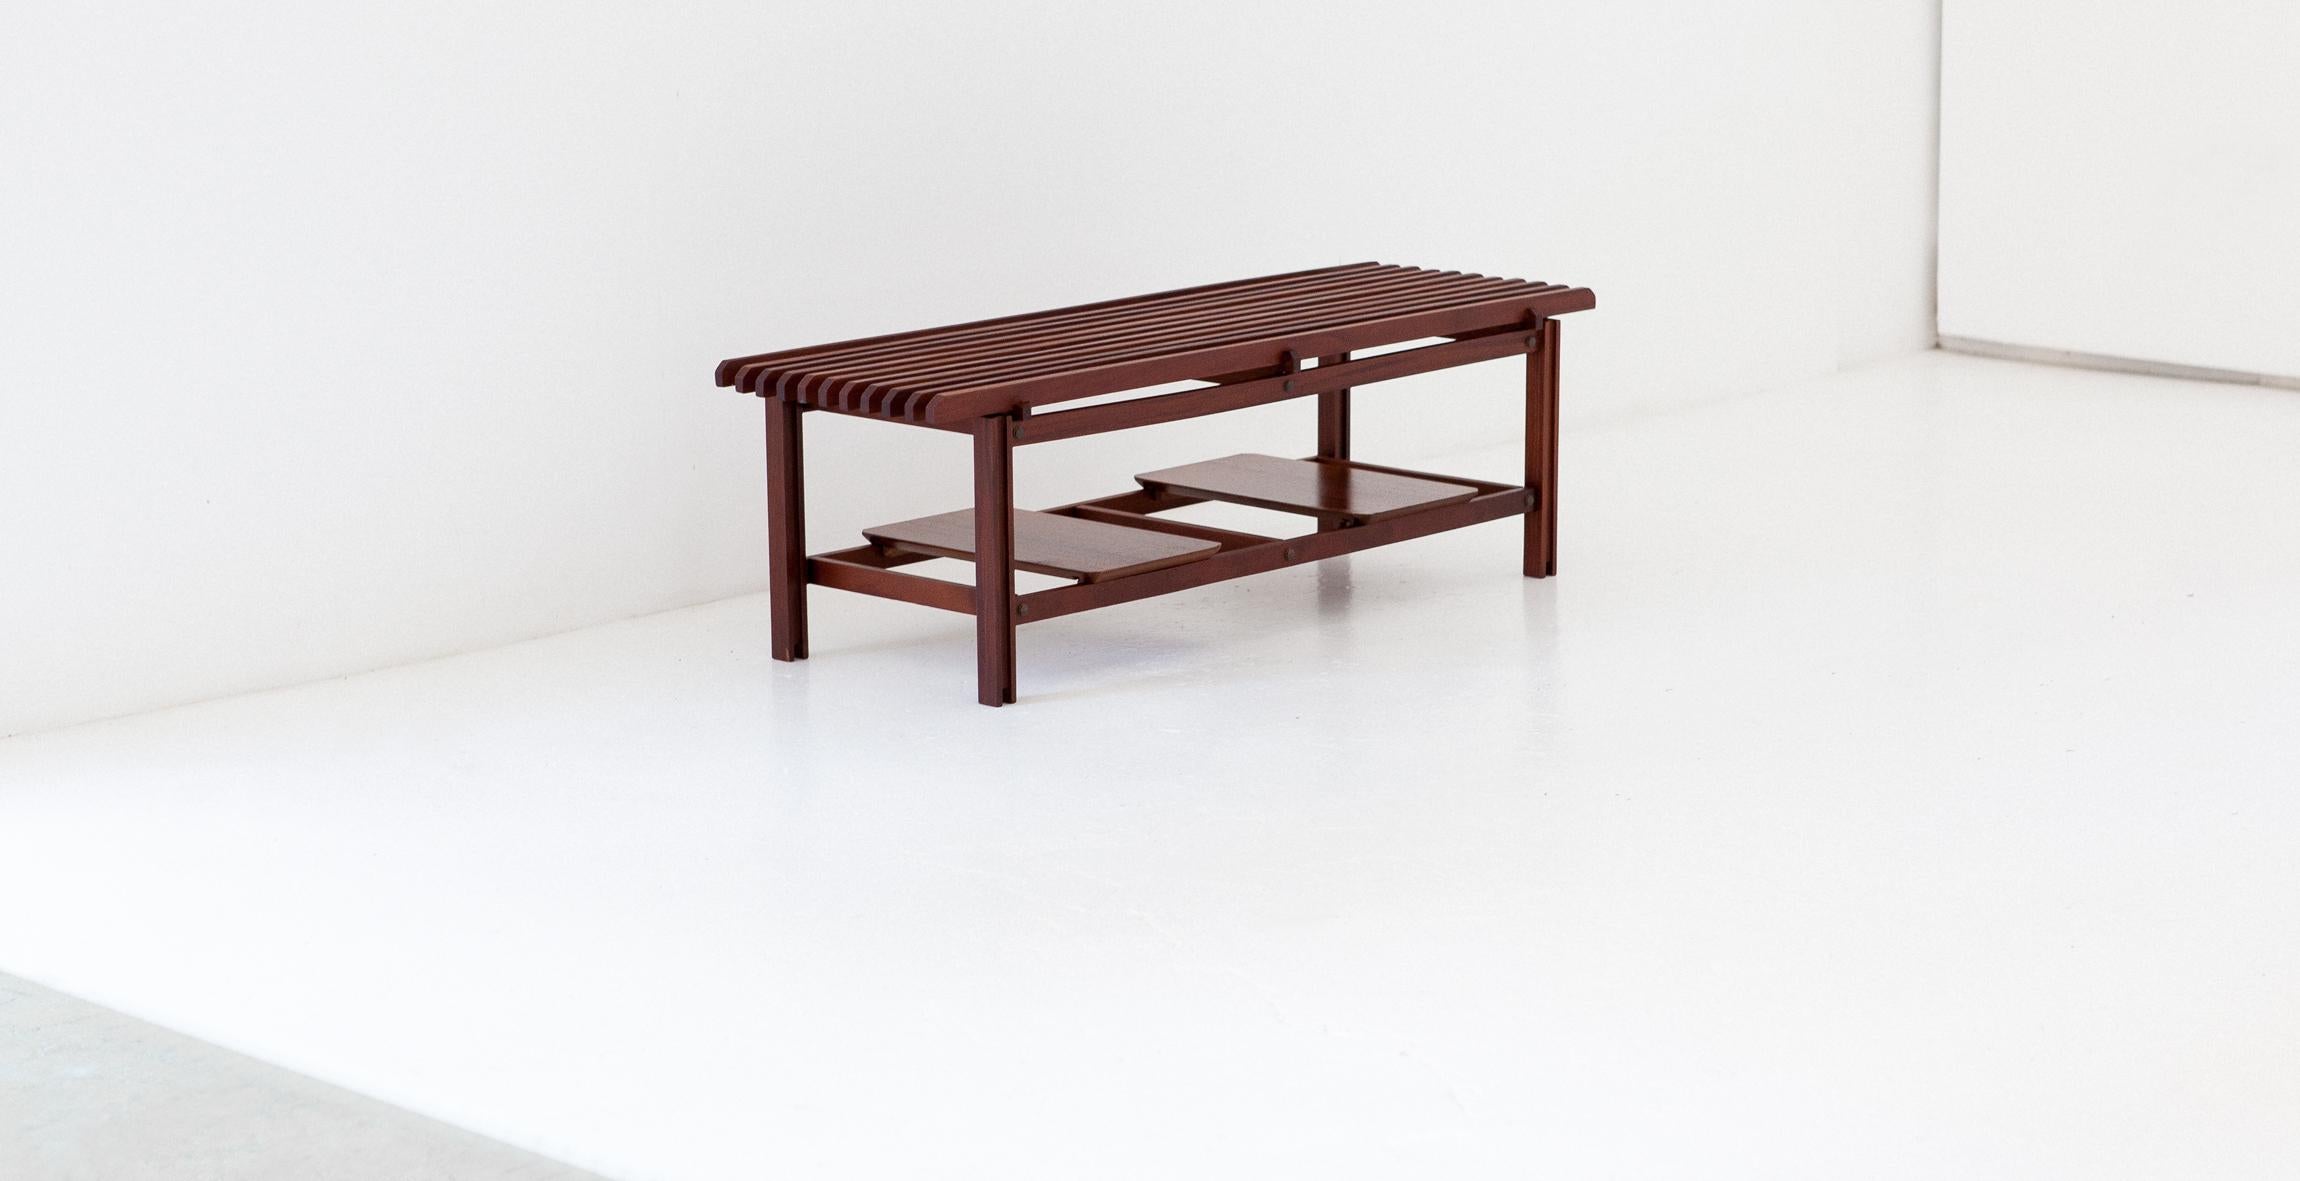 Mid-Century Modern bench, manufactured in Italy in 1950s
Made of solid mahogany wood with two extractable teak trays that can be used such as a magazine and book holder. Brass bolts.
Completely restored, sanded and oil finished. 
The designer is